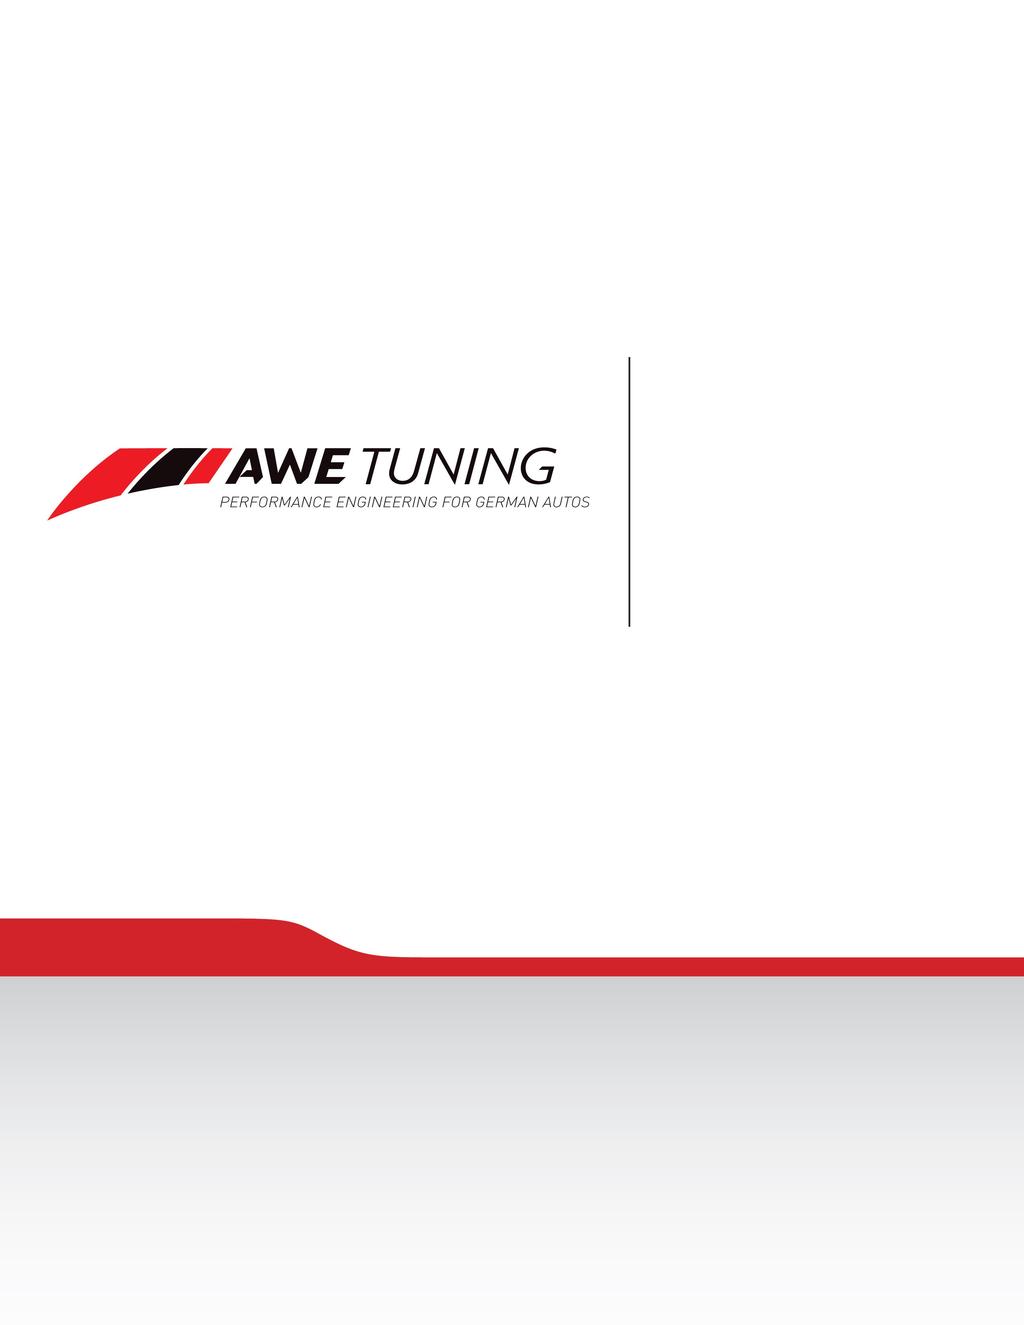 INSTALLATION GUIDE Congratulations on your purchase of the AWE Tuning high performance exhaust for the 2008+ Audi Q5 3.2L. 2008-> Audi Q5 3.